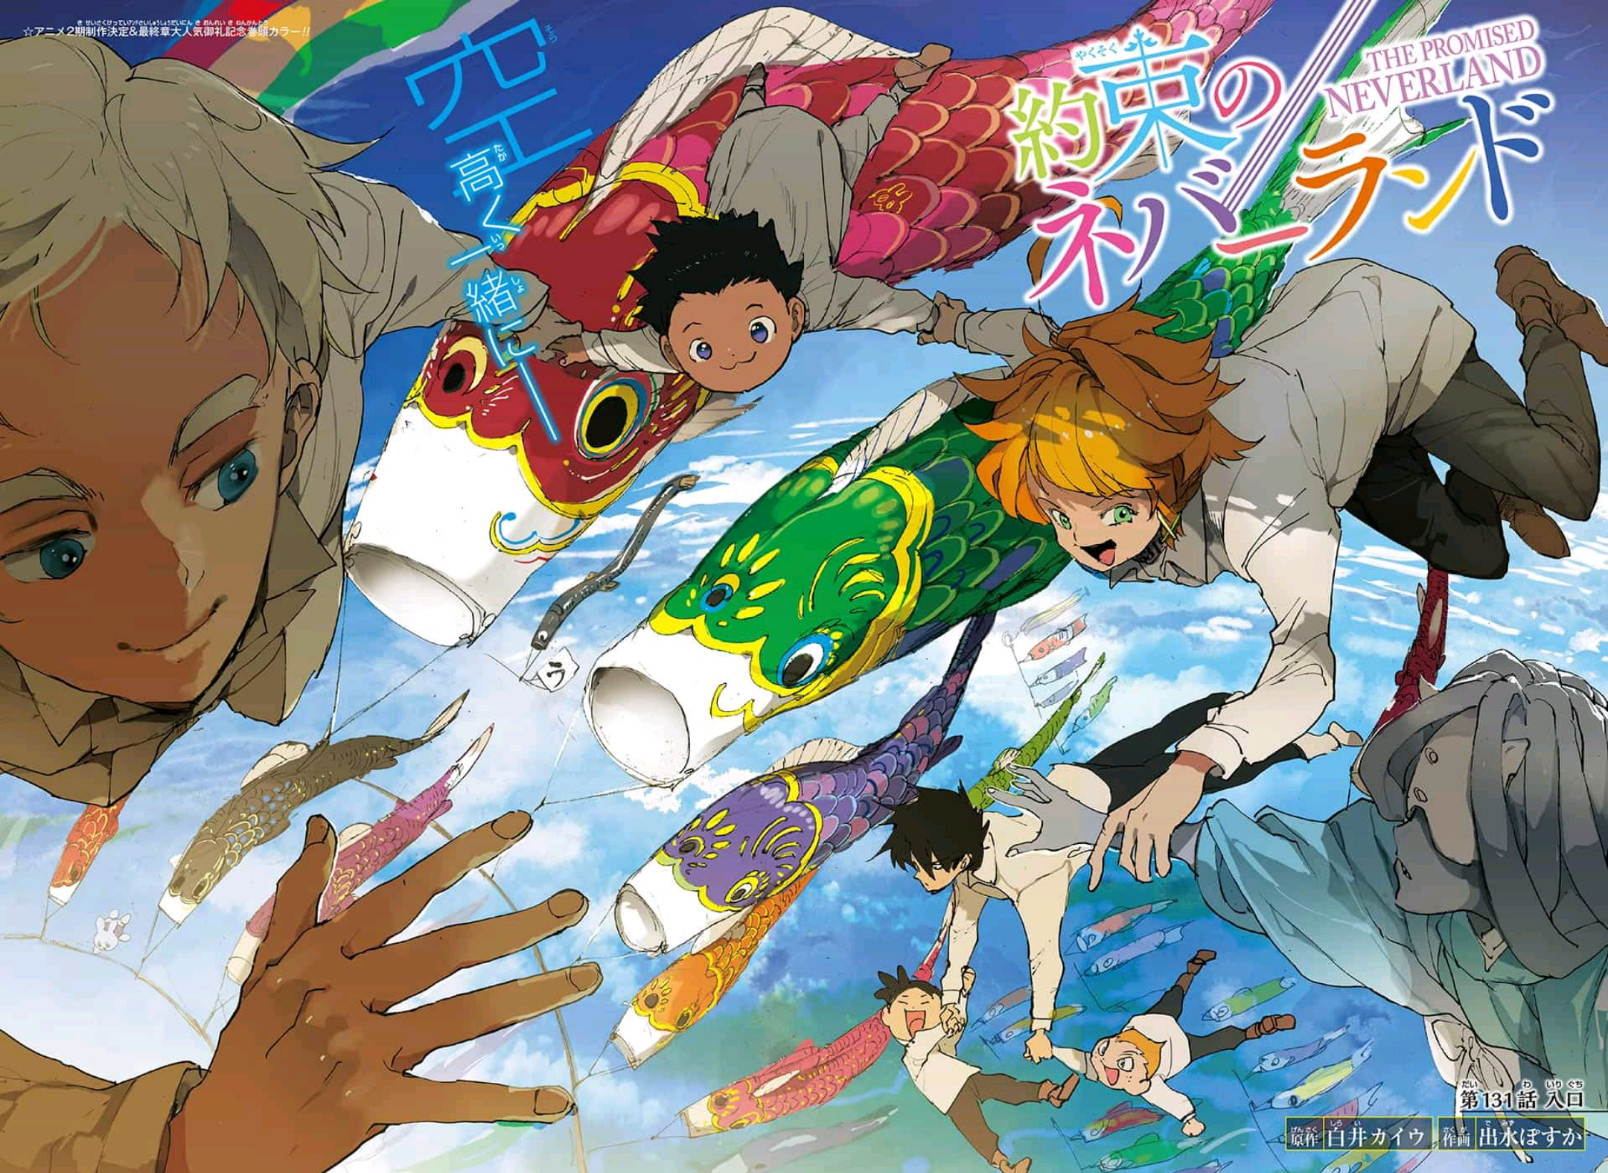 The Promised Neverland Skips an Important Debut with Major Story Overhaul